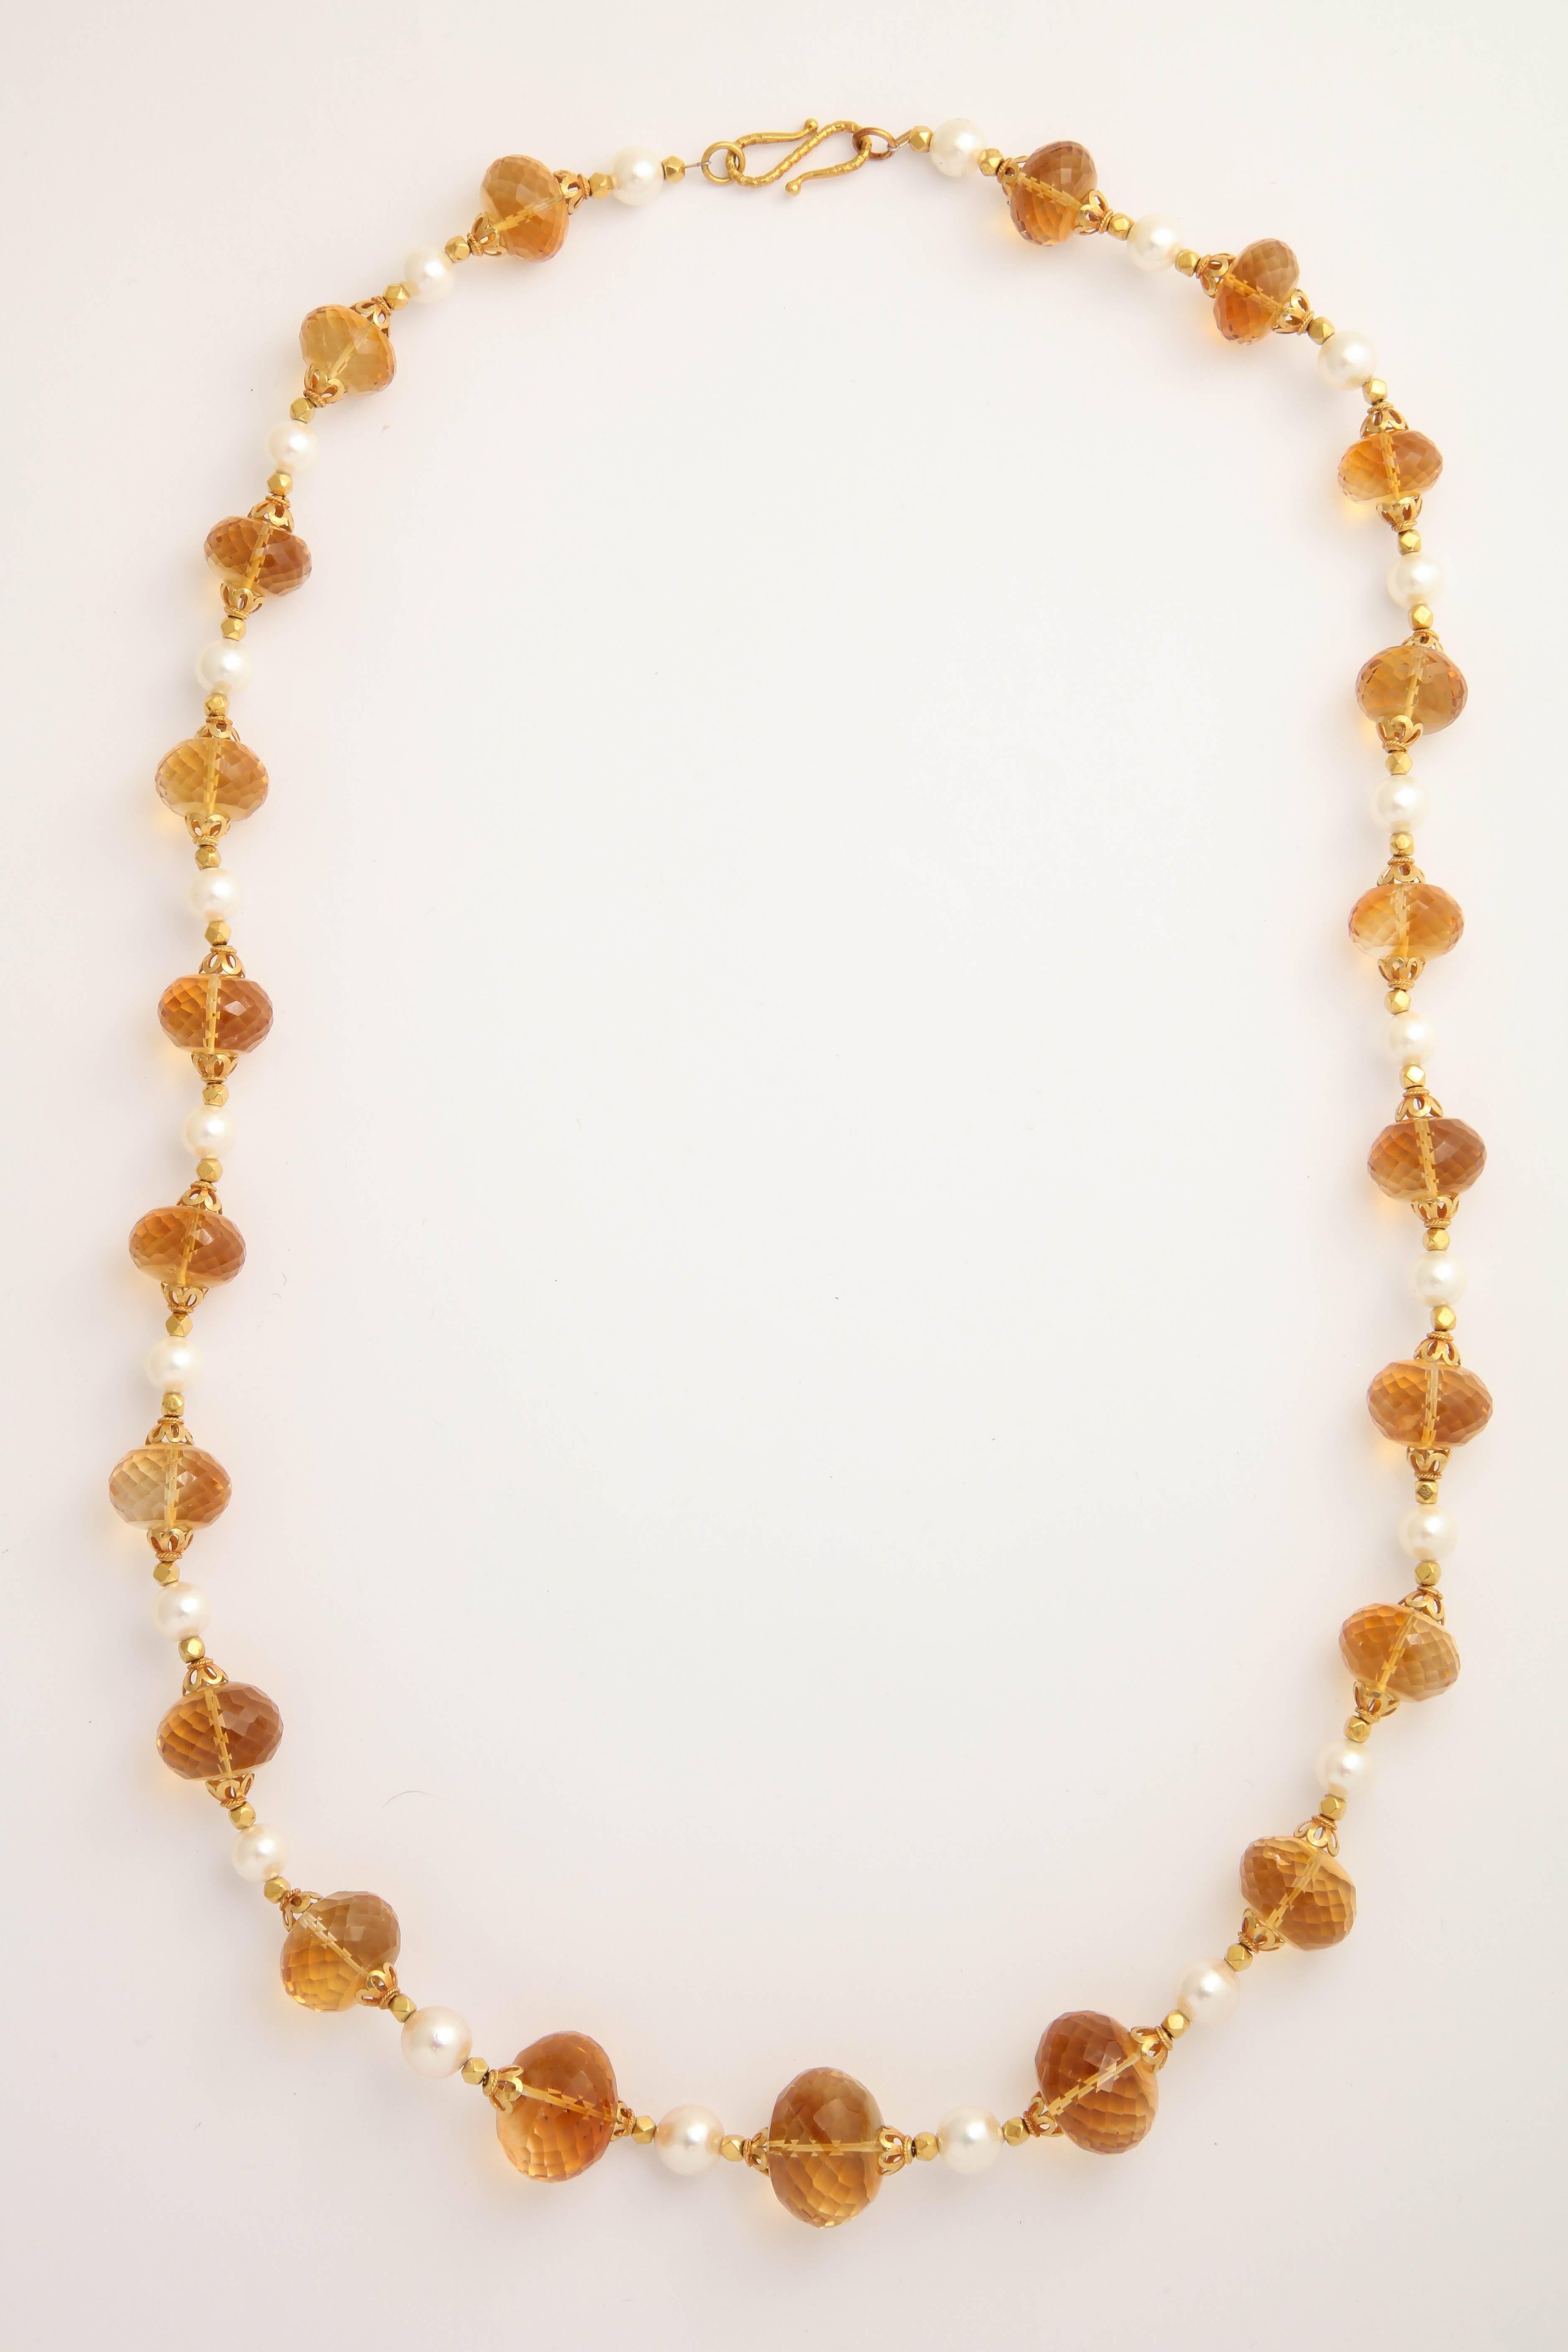 These spectacular faceted citrine beads are not heat treated or irradiated. They are micro faceted to give them extreme sparkle. The fresh water pearls in between them are 6-8 mm and A-quality. The gold beads are 18kt, a filigree cap on either side